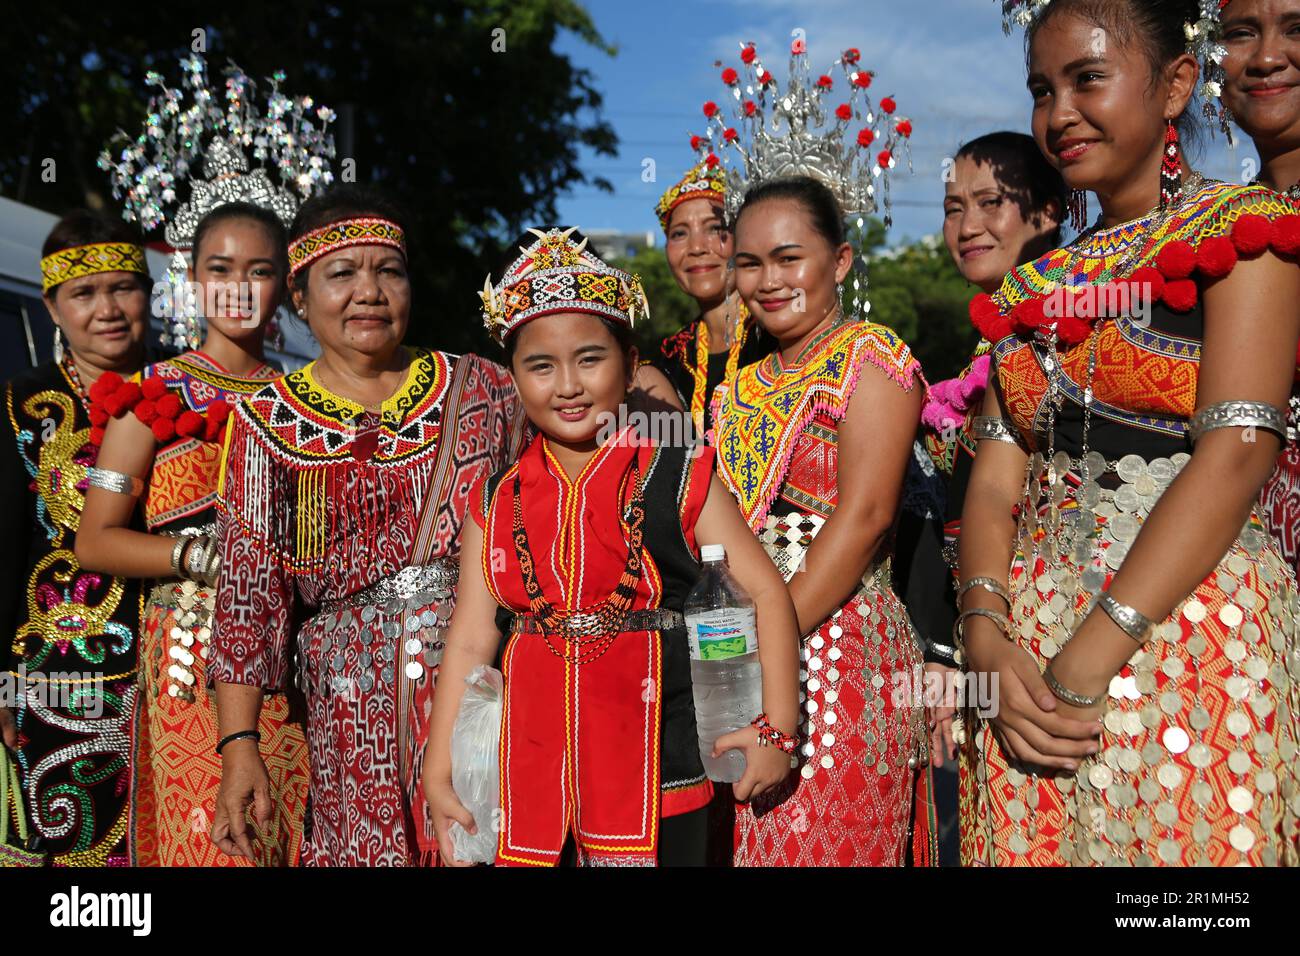 Dayak People from different tribes together at a parade in Kuching, Sarawak, Malaysia, Borneo. Stock Photo